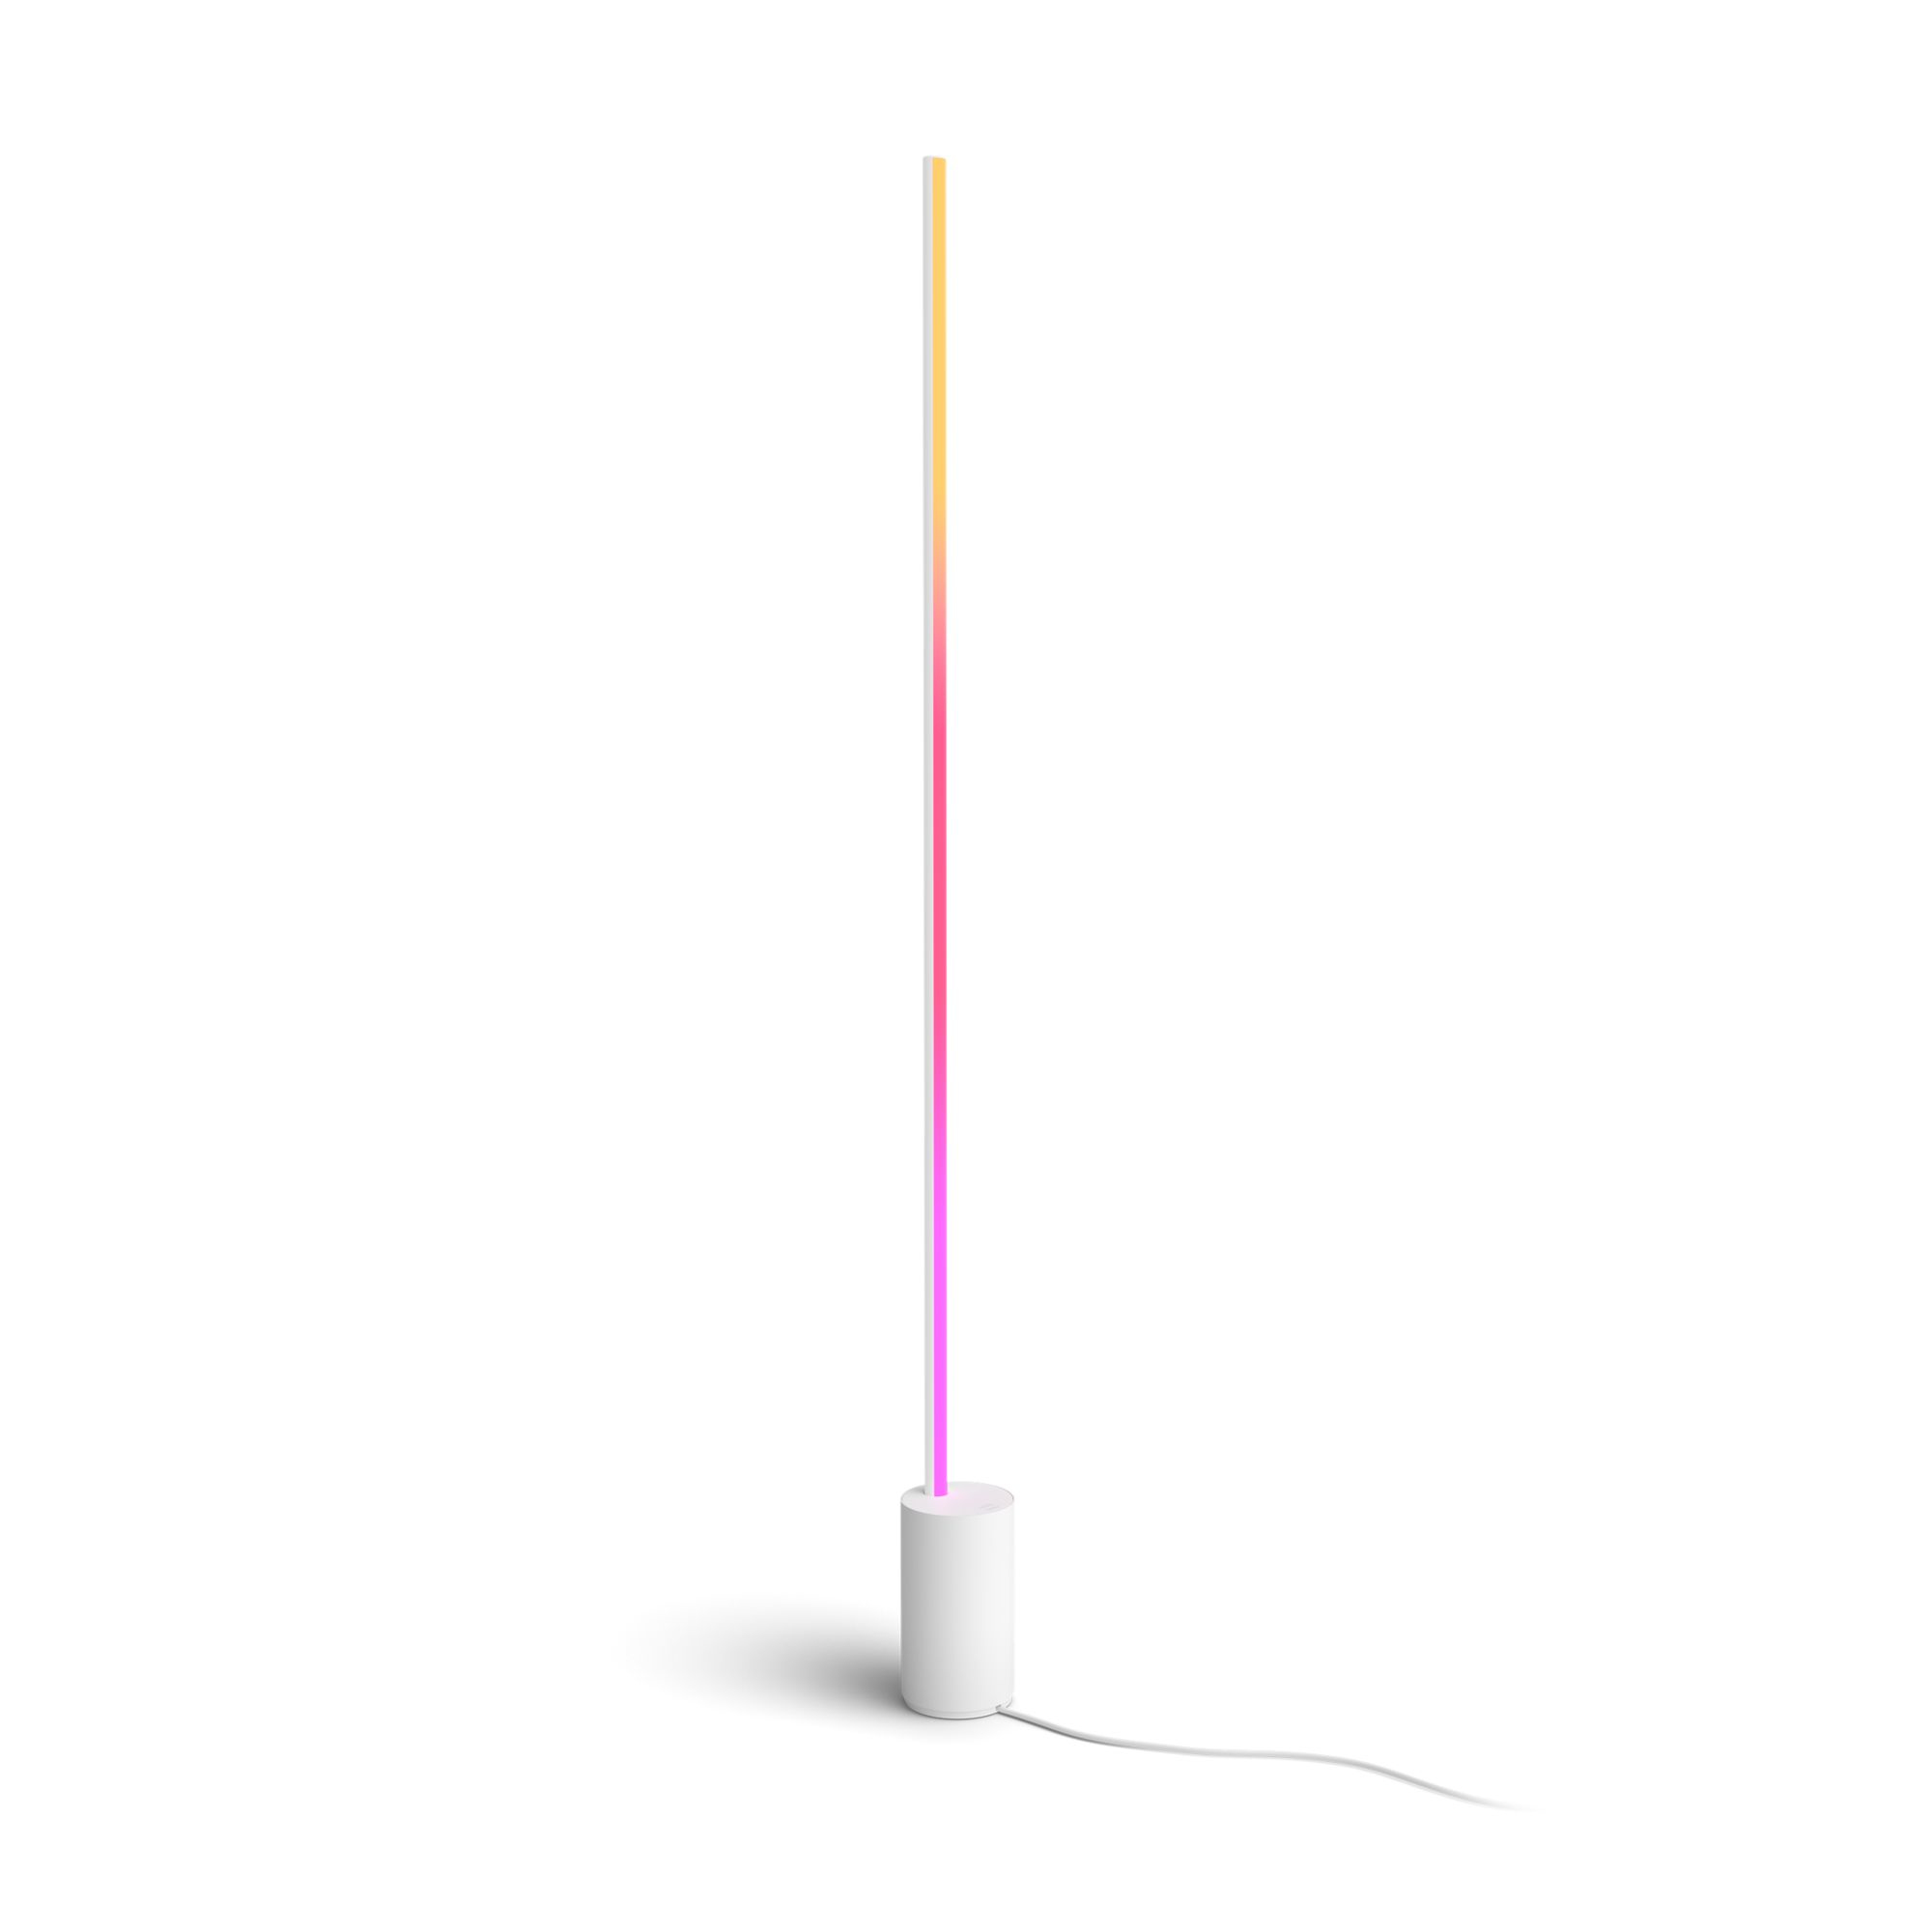 Philips by Signify Signe gradient vloerlamp